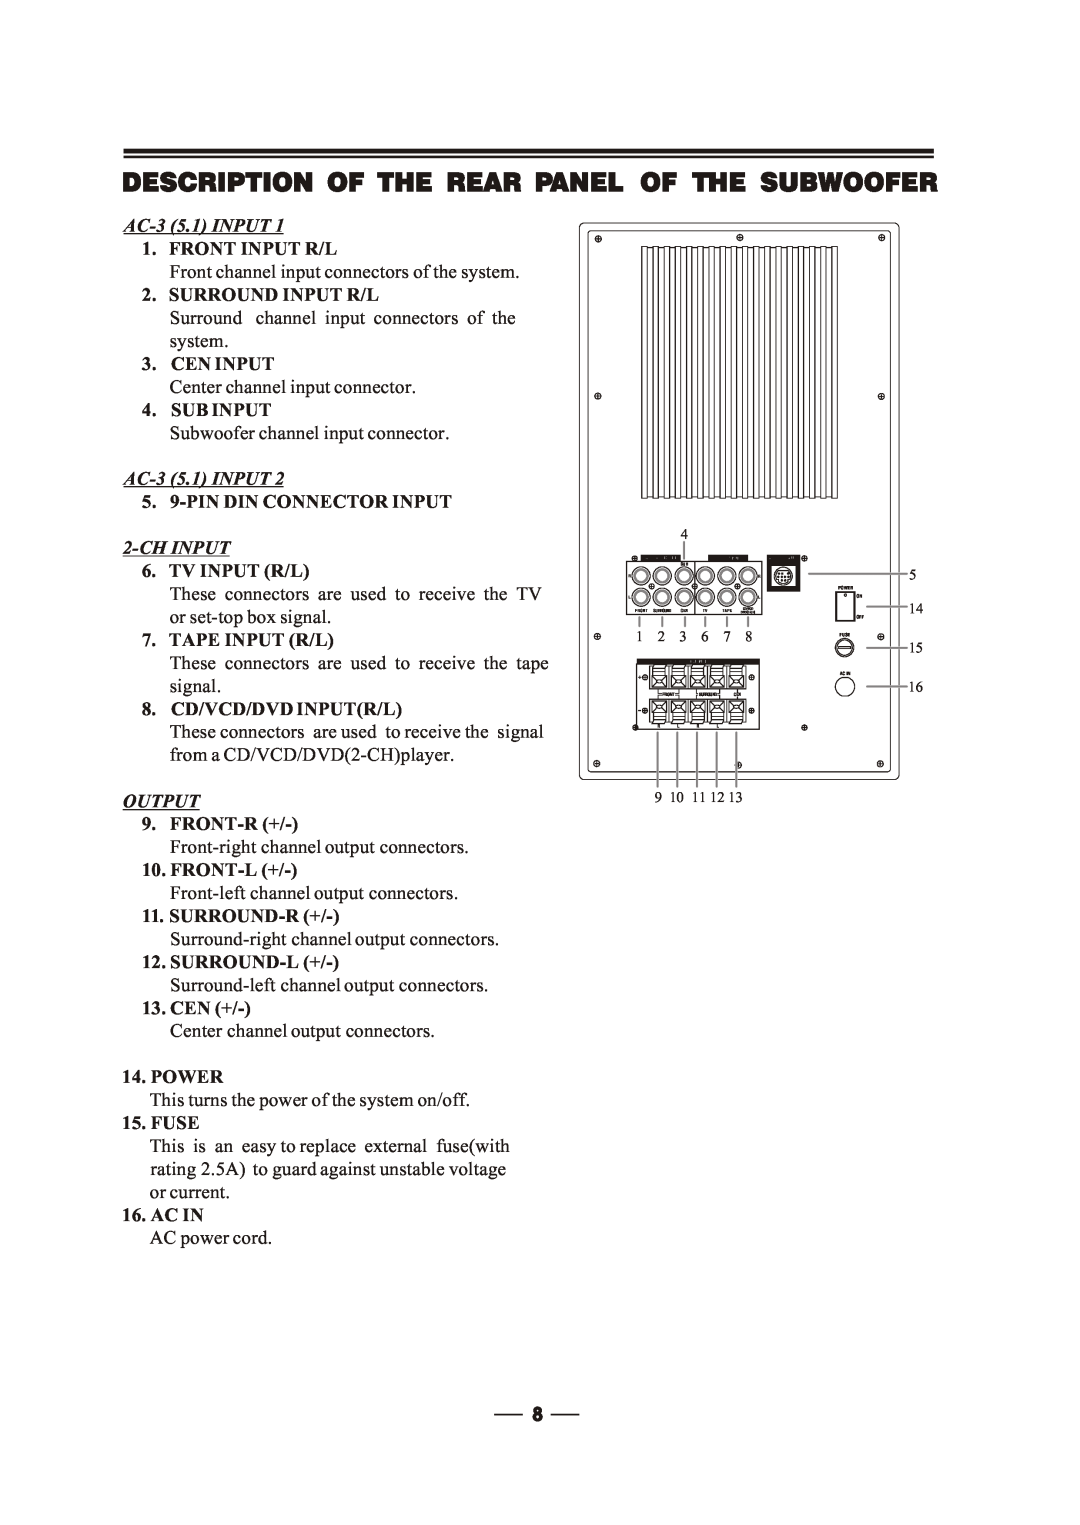 MidiLand 747H manual Description Of The Rear Panel Of The Subwoofer, AC-35.1 INPUT, Chinput, Output 